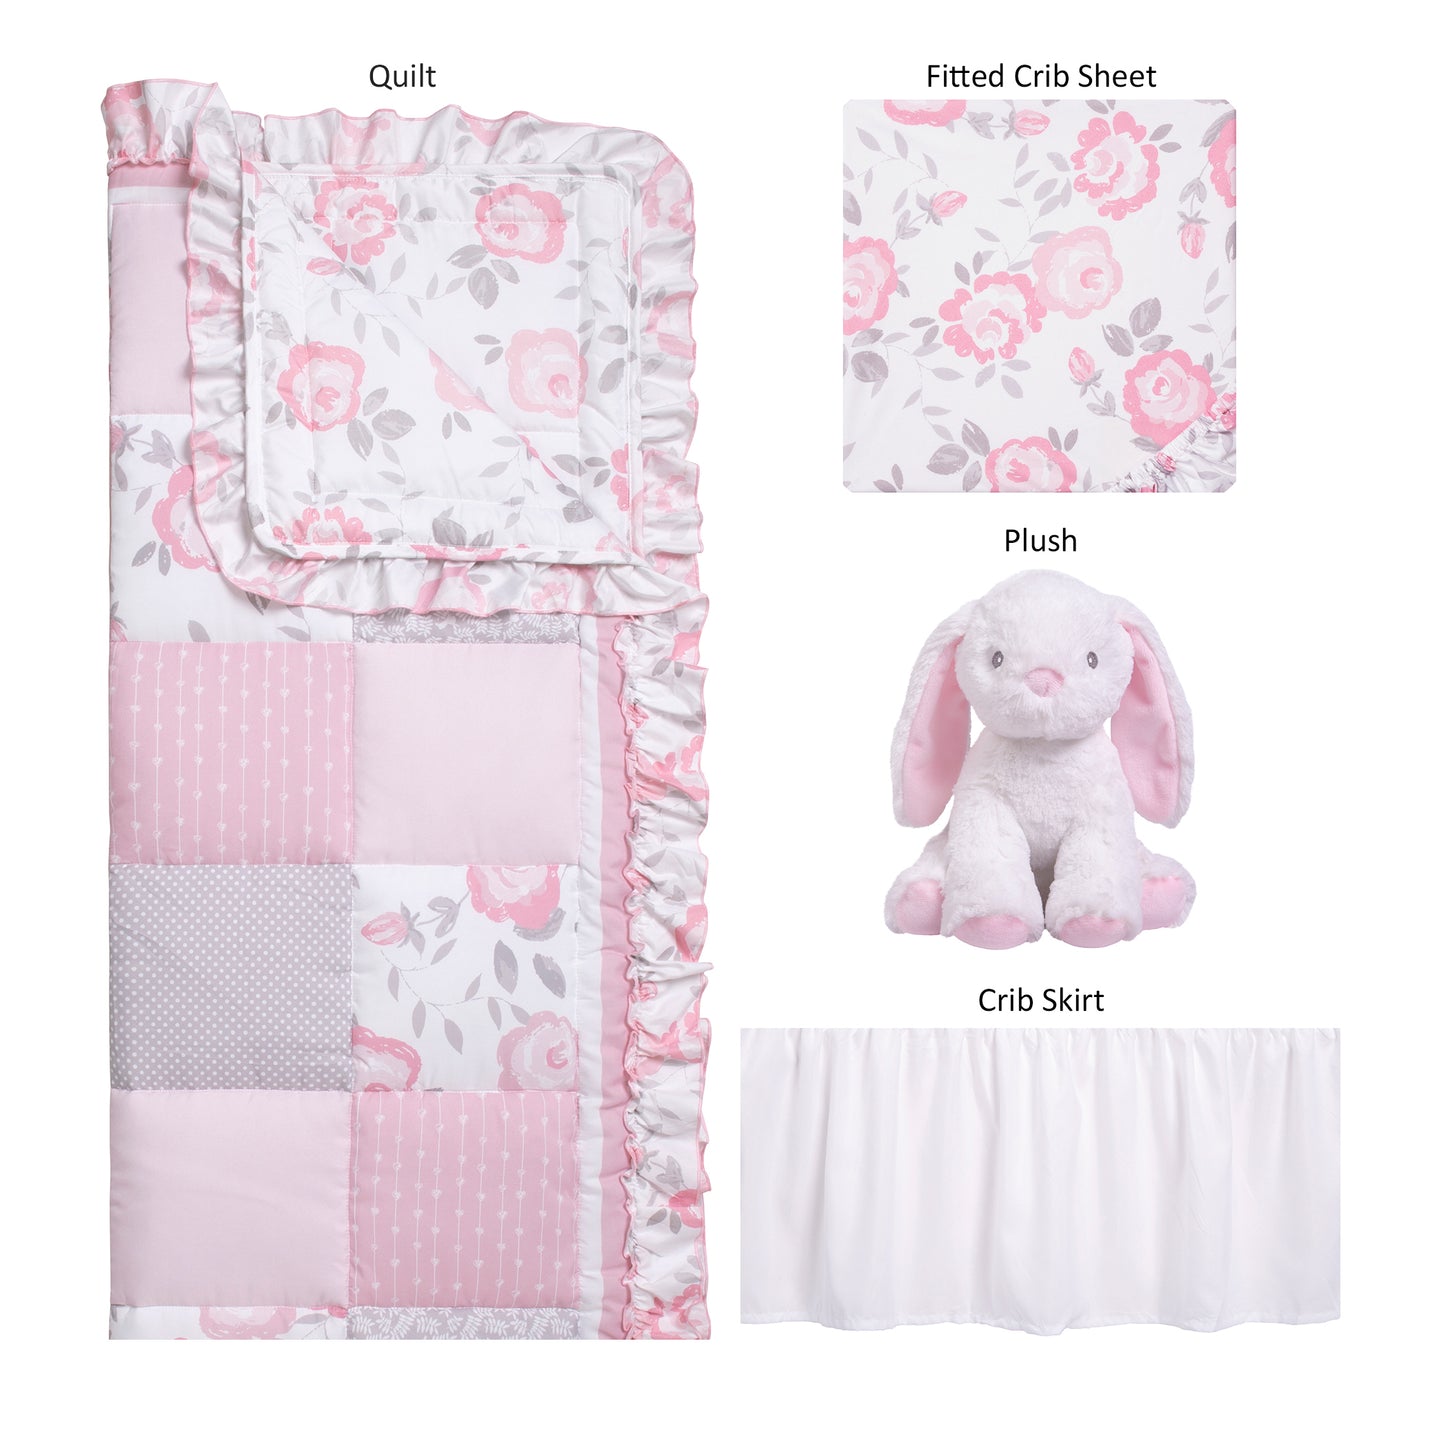 Emma 4 Piece Crib Bedding Collection by Sammy and Lou; pieces laid out includes nursery quilt/playmat, crib sheet, crib skirt, and bunny plush toy